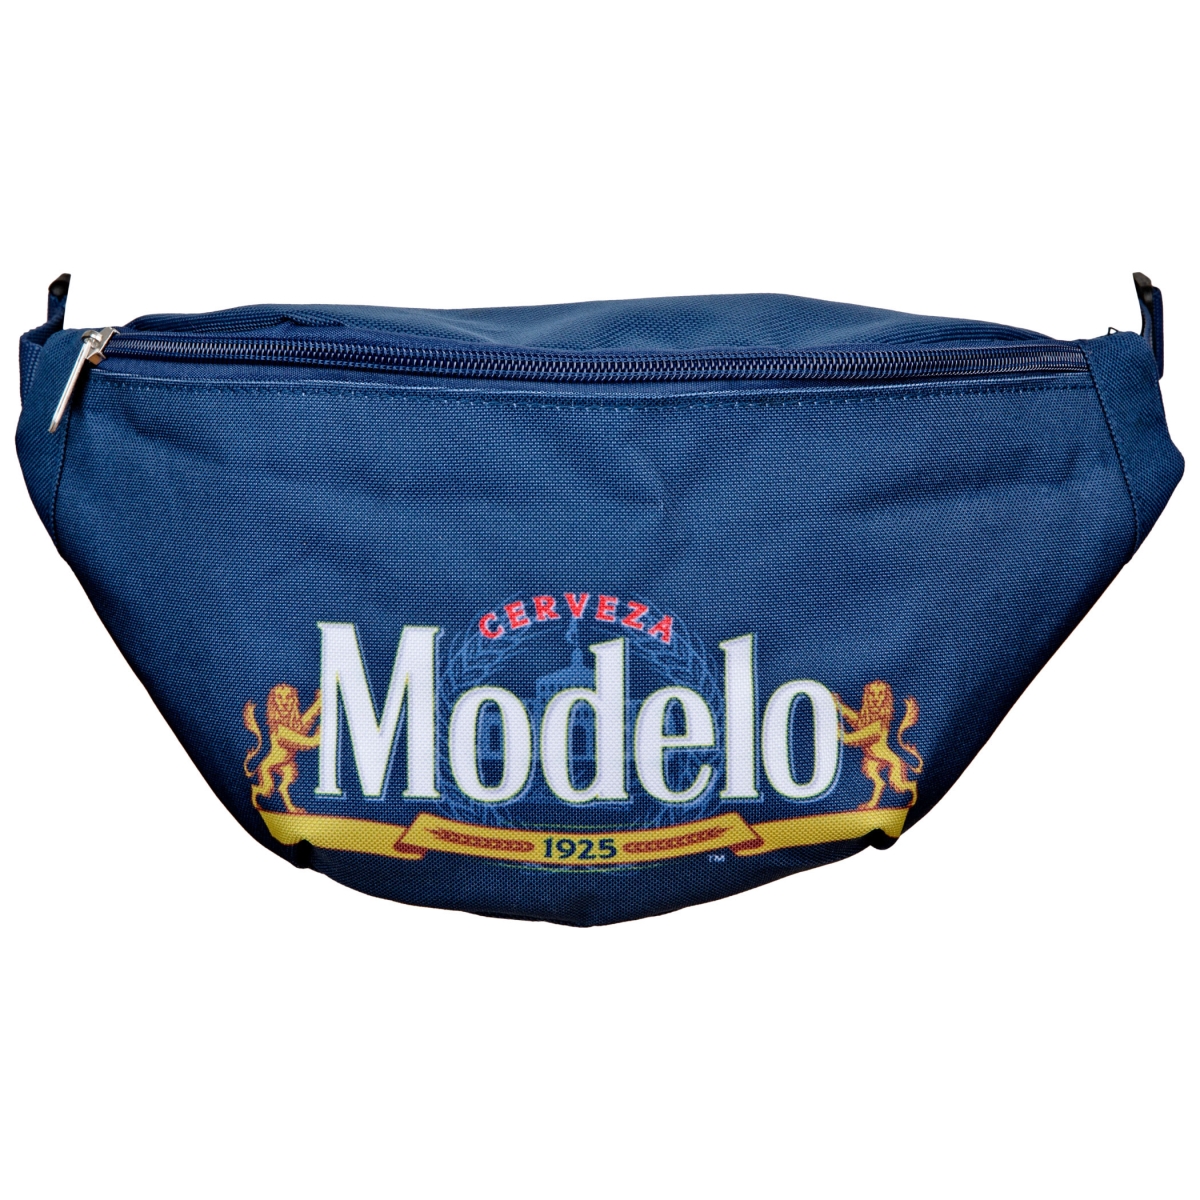 Picture of Modelo Especial 822538 Modela Especial Brand Label Fanny Pack, Blue